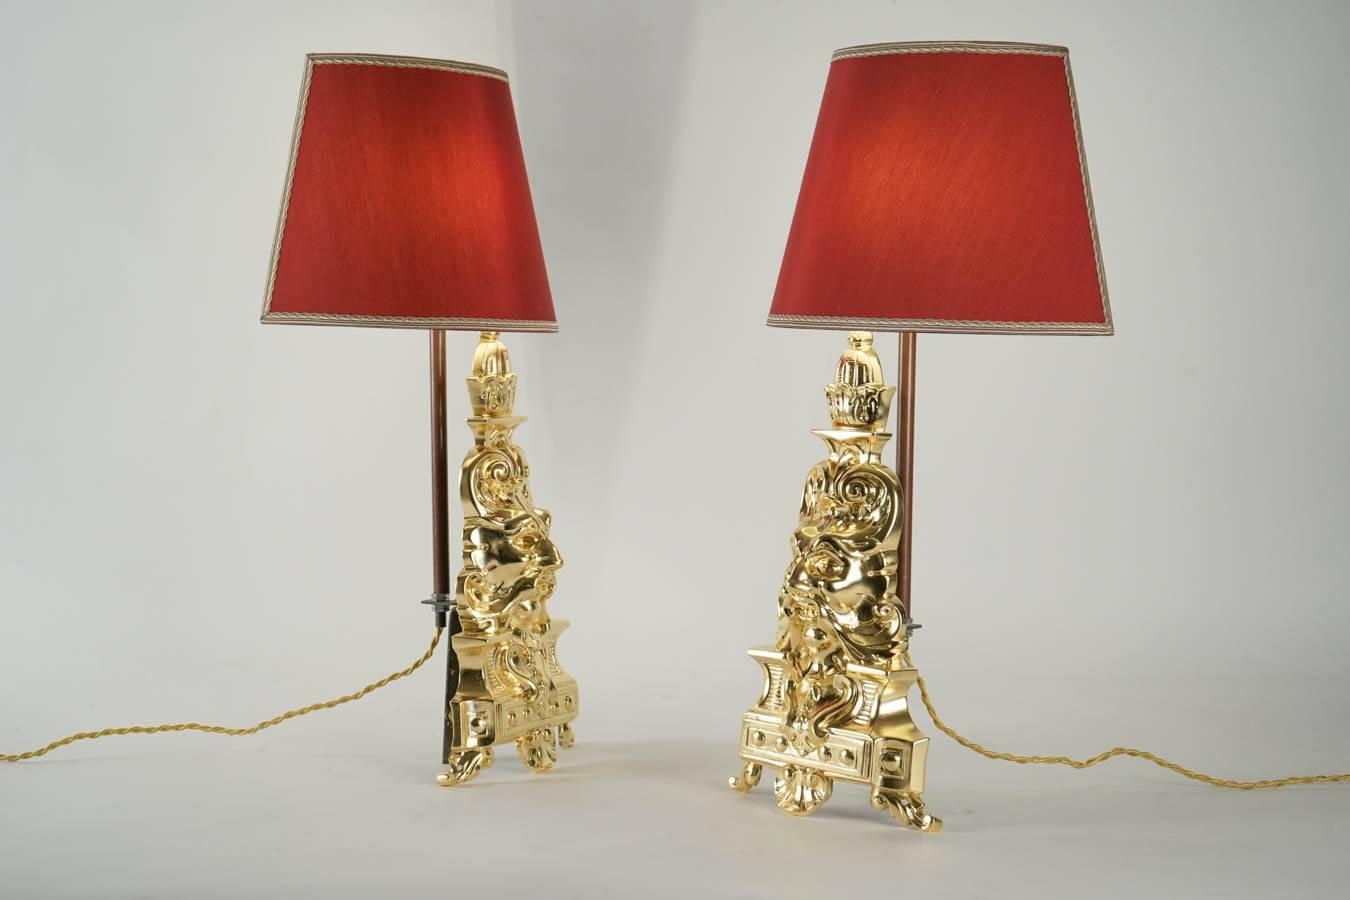 Pair of Fireplace Dogs in Gold Gilt Bronze 19th Century Turned into Lamps 2